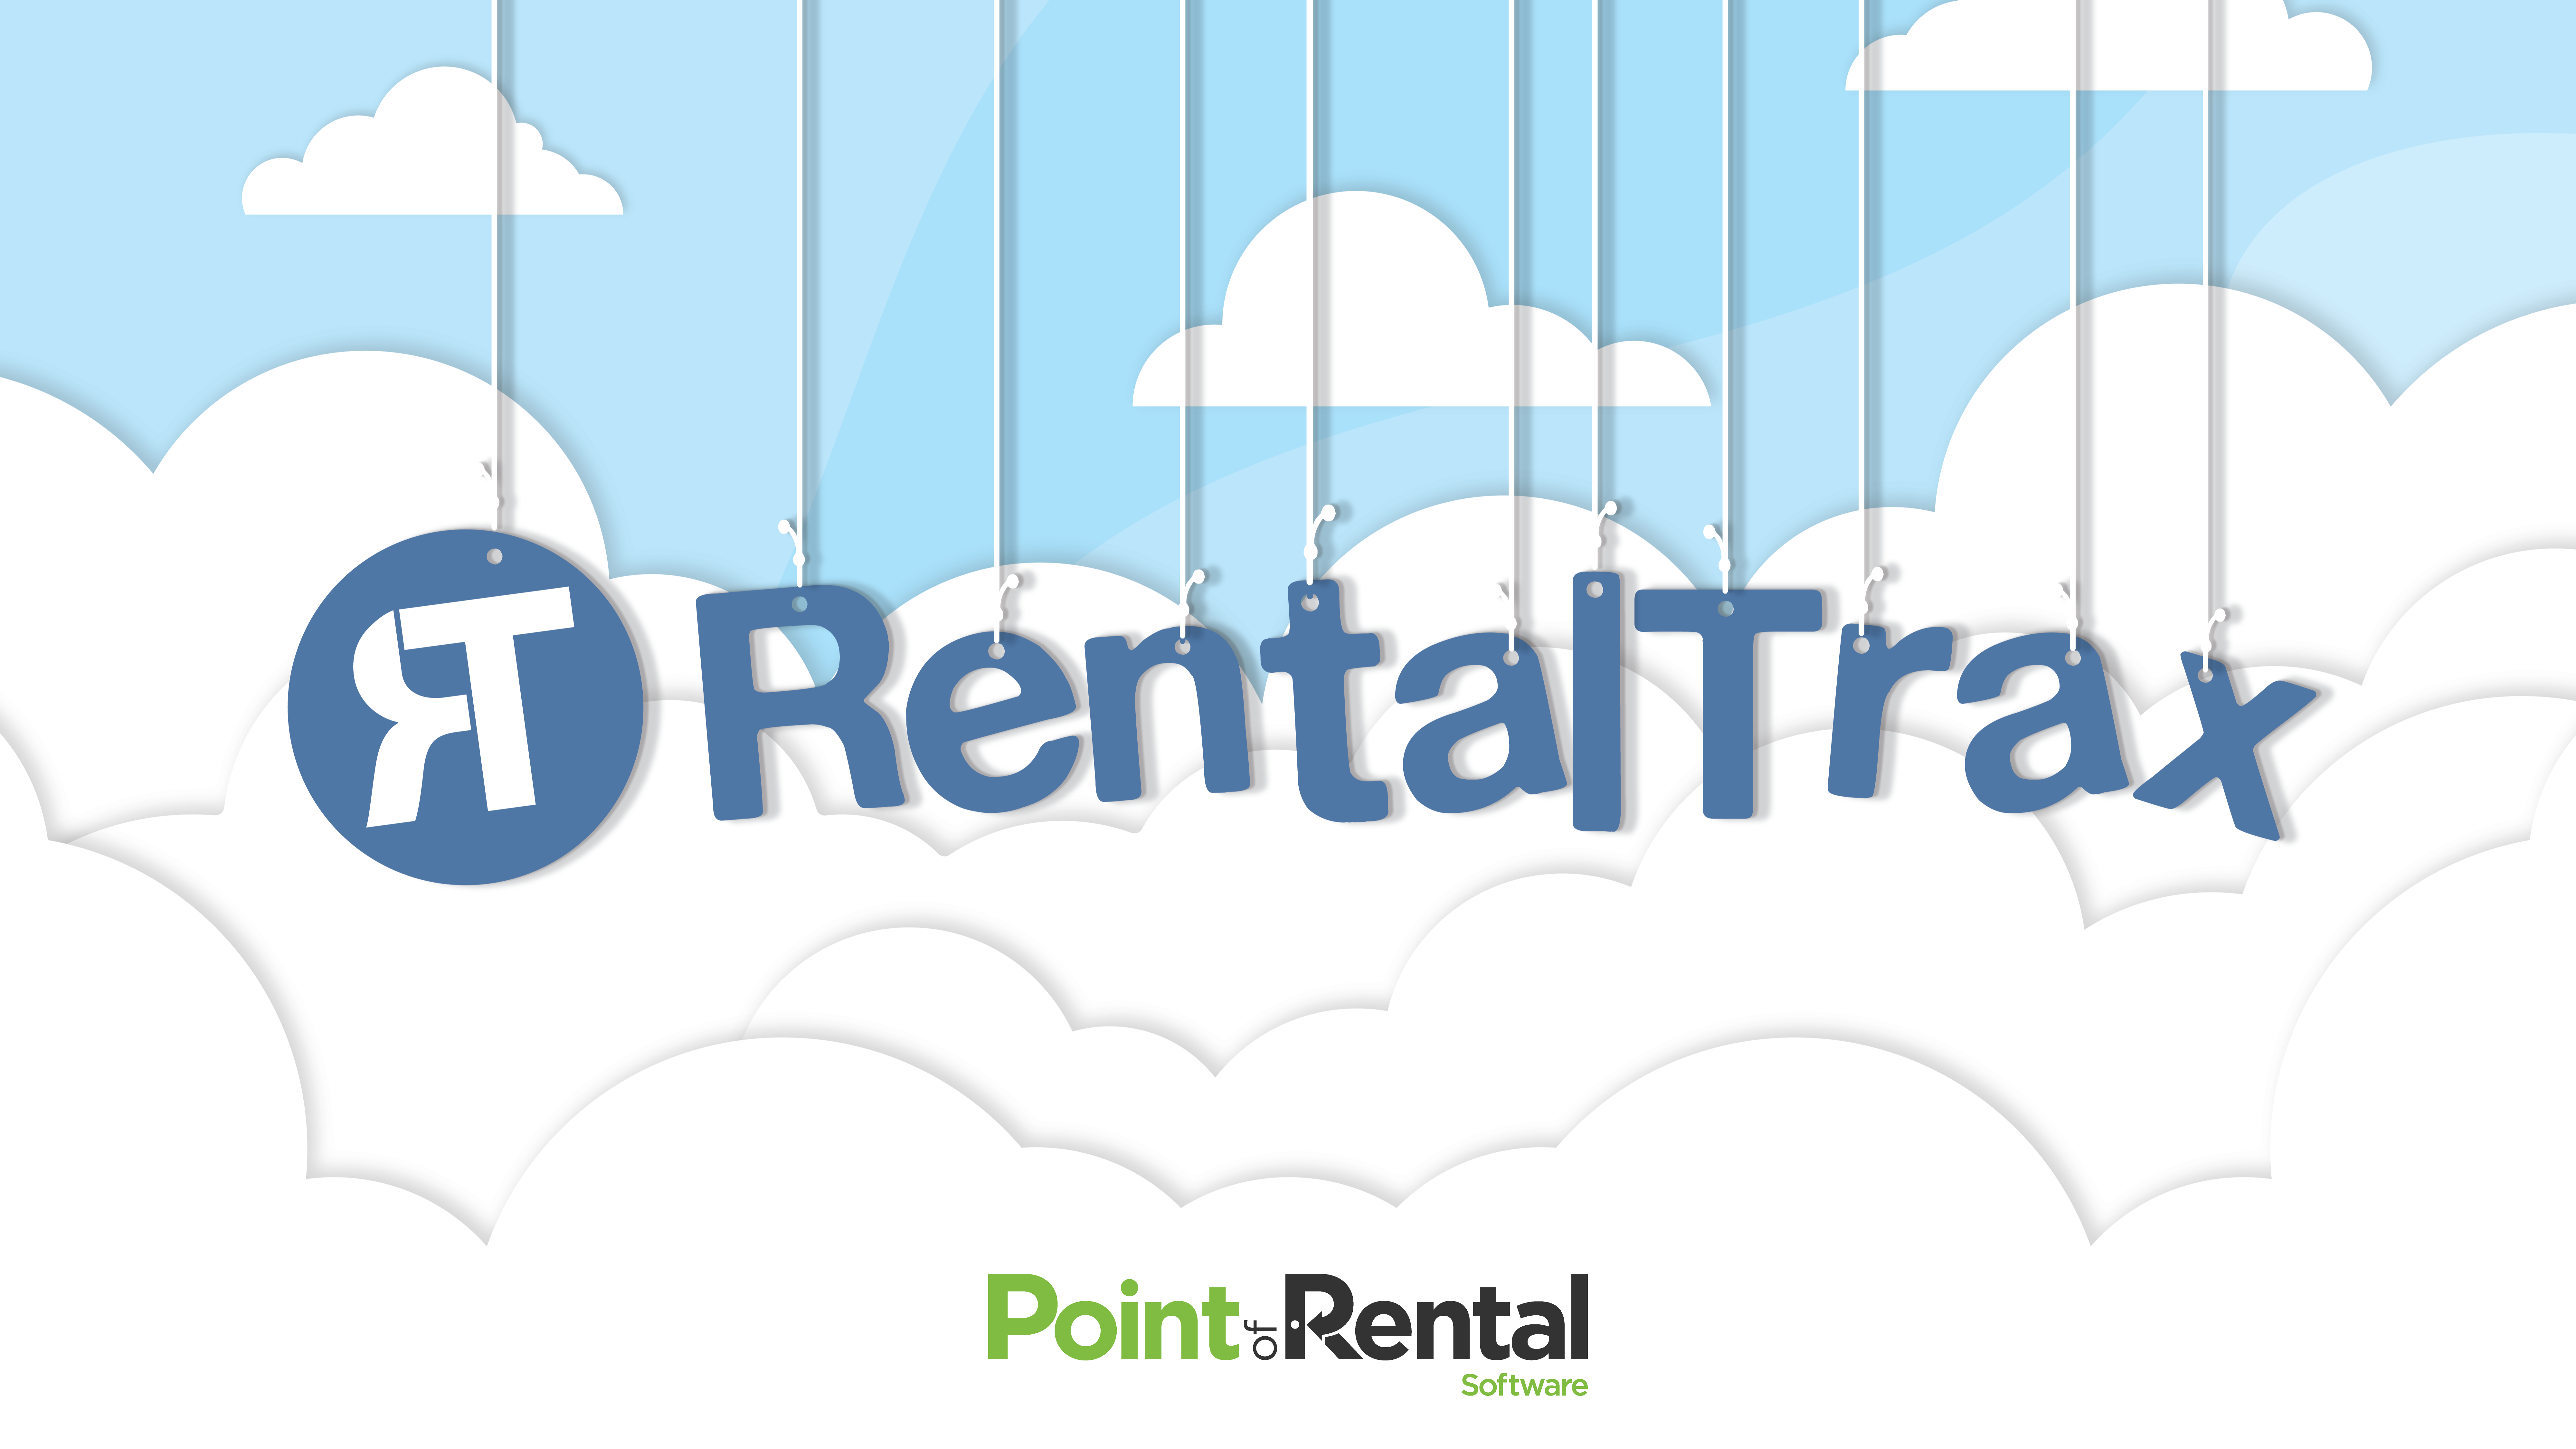 Point of Rental has acquired RentalTrax